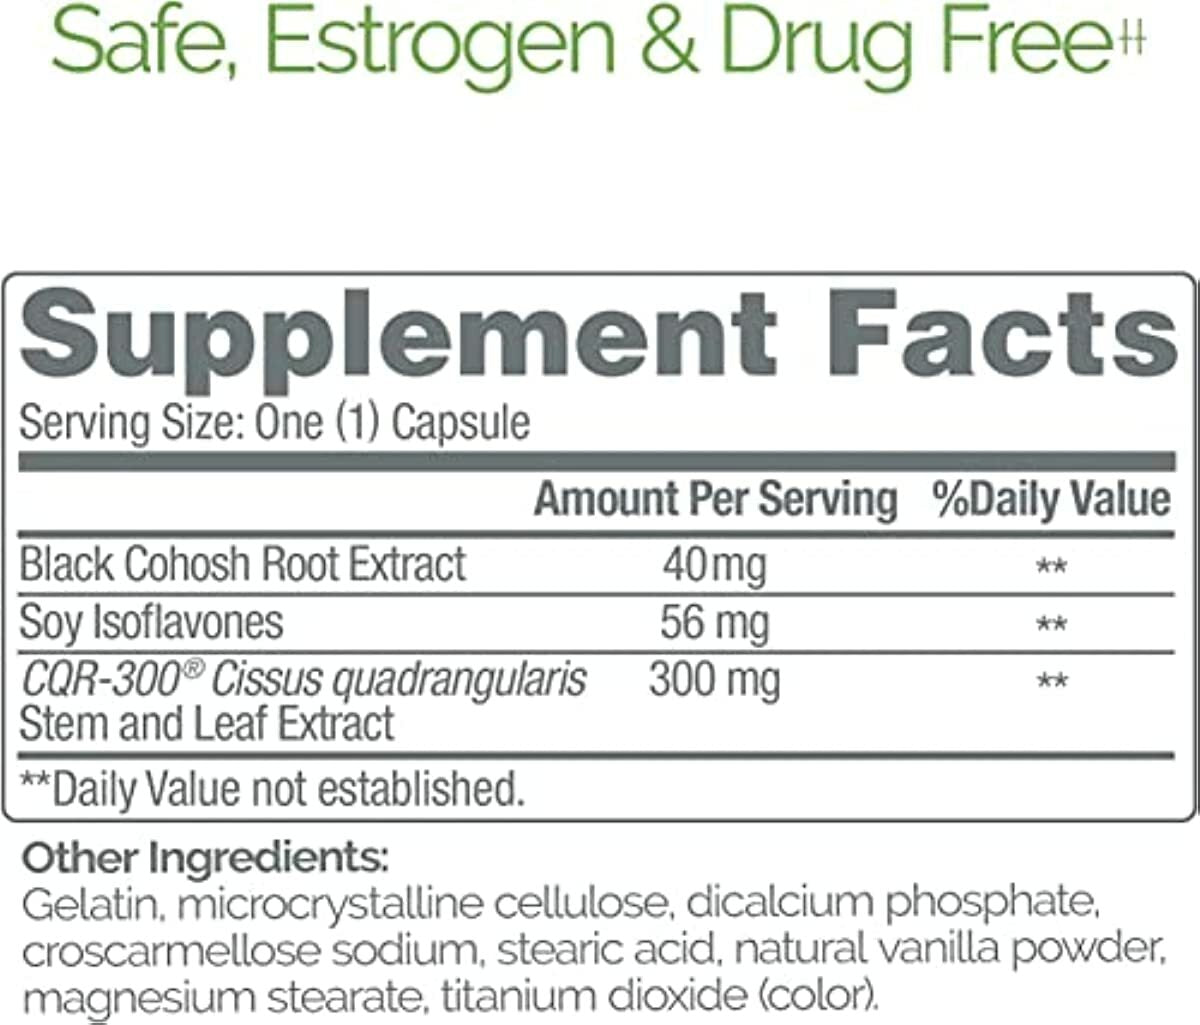 Estroven Weight Management for Menopause Relief, Helps Reduce Hot Flashes and Night Sweats, Helps Manage Weight, 30 Count